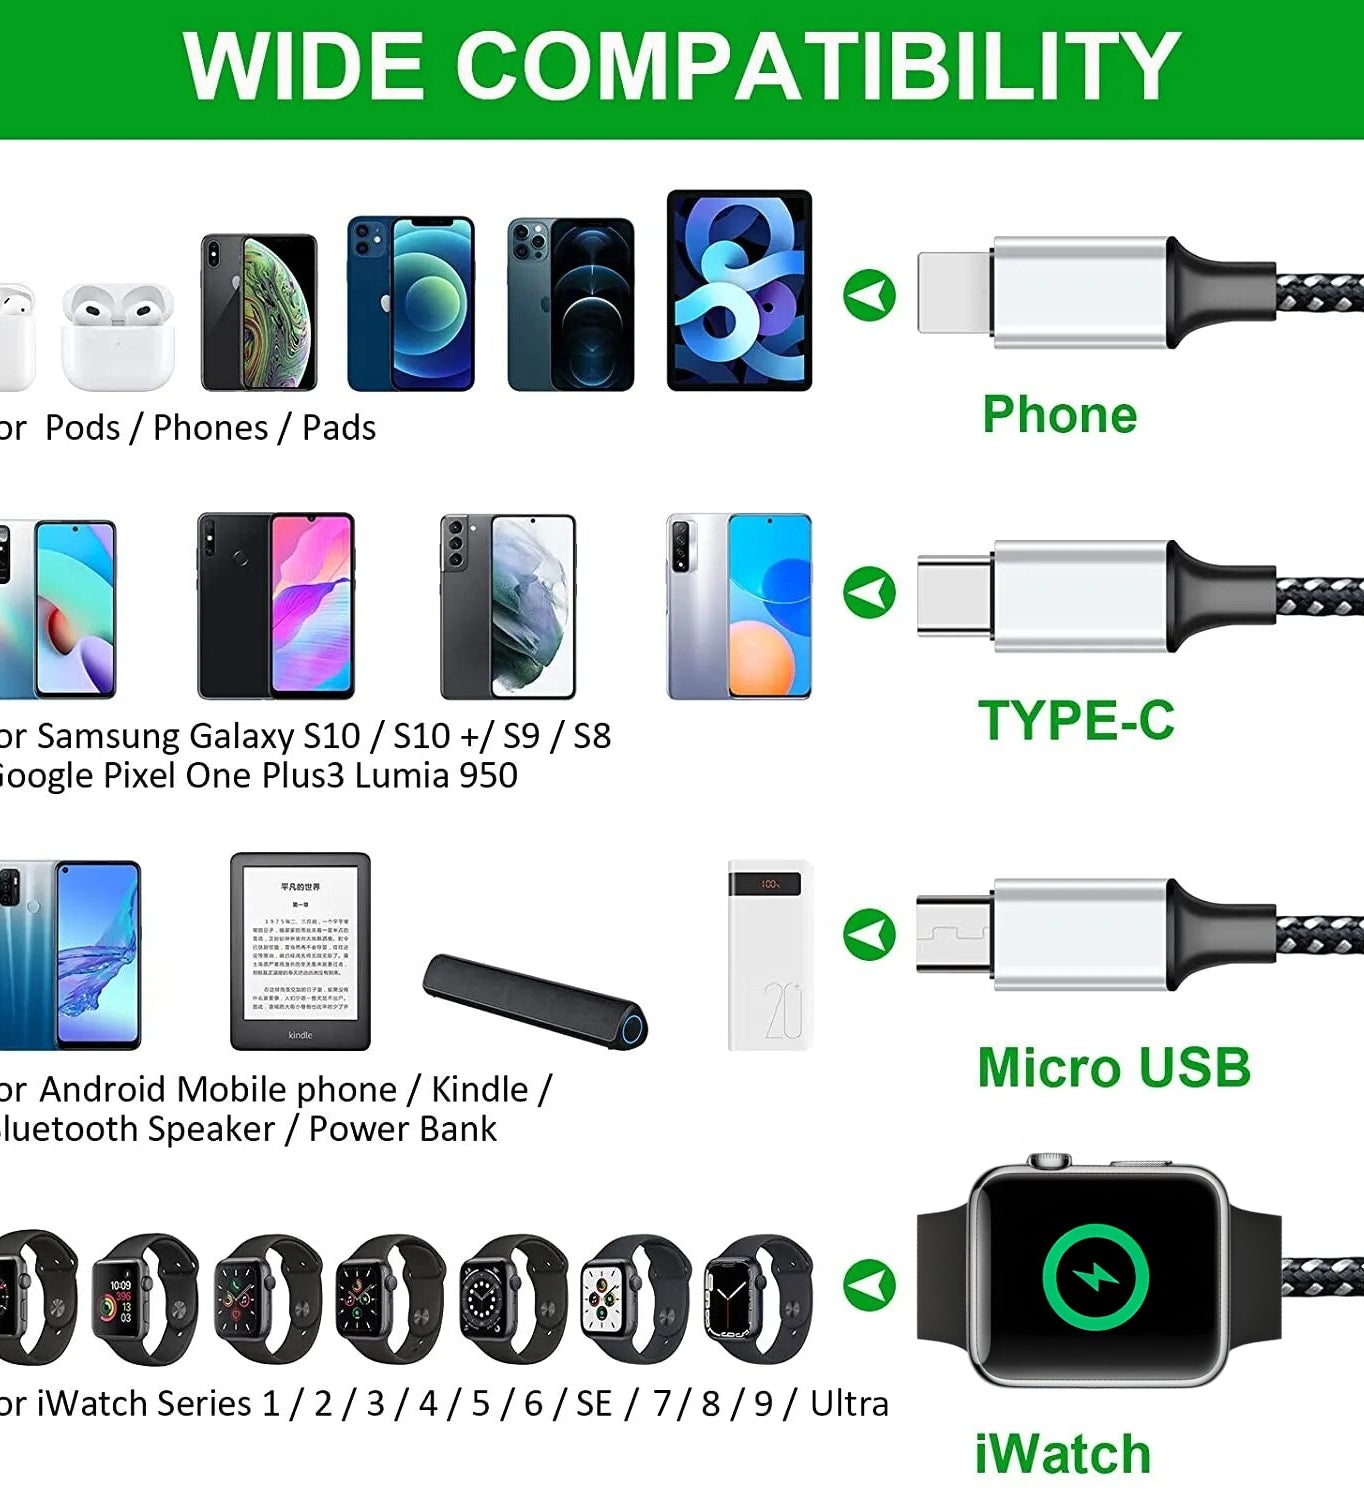 4-in-1 Braided Multi Charging Cable 6ft Top-Up - Smart charging solutions